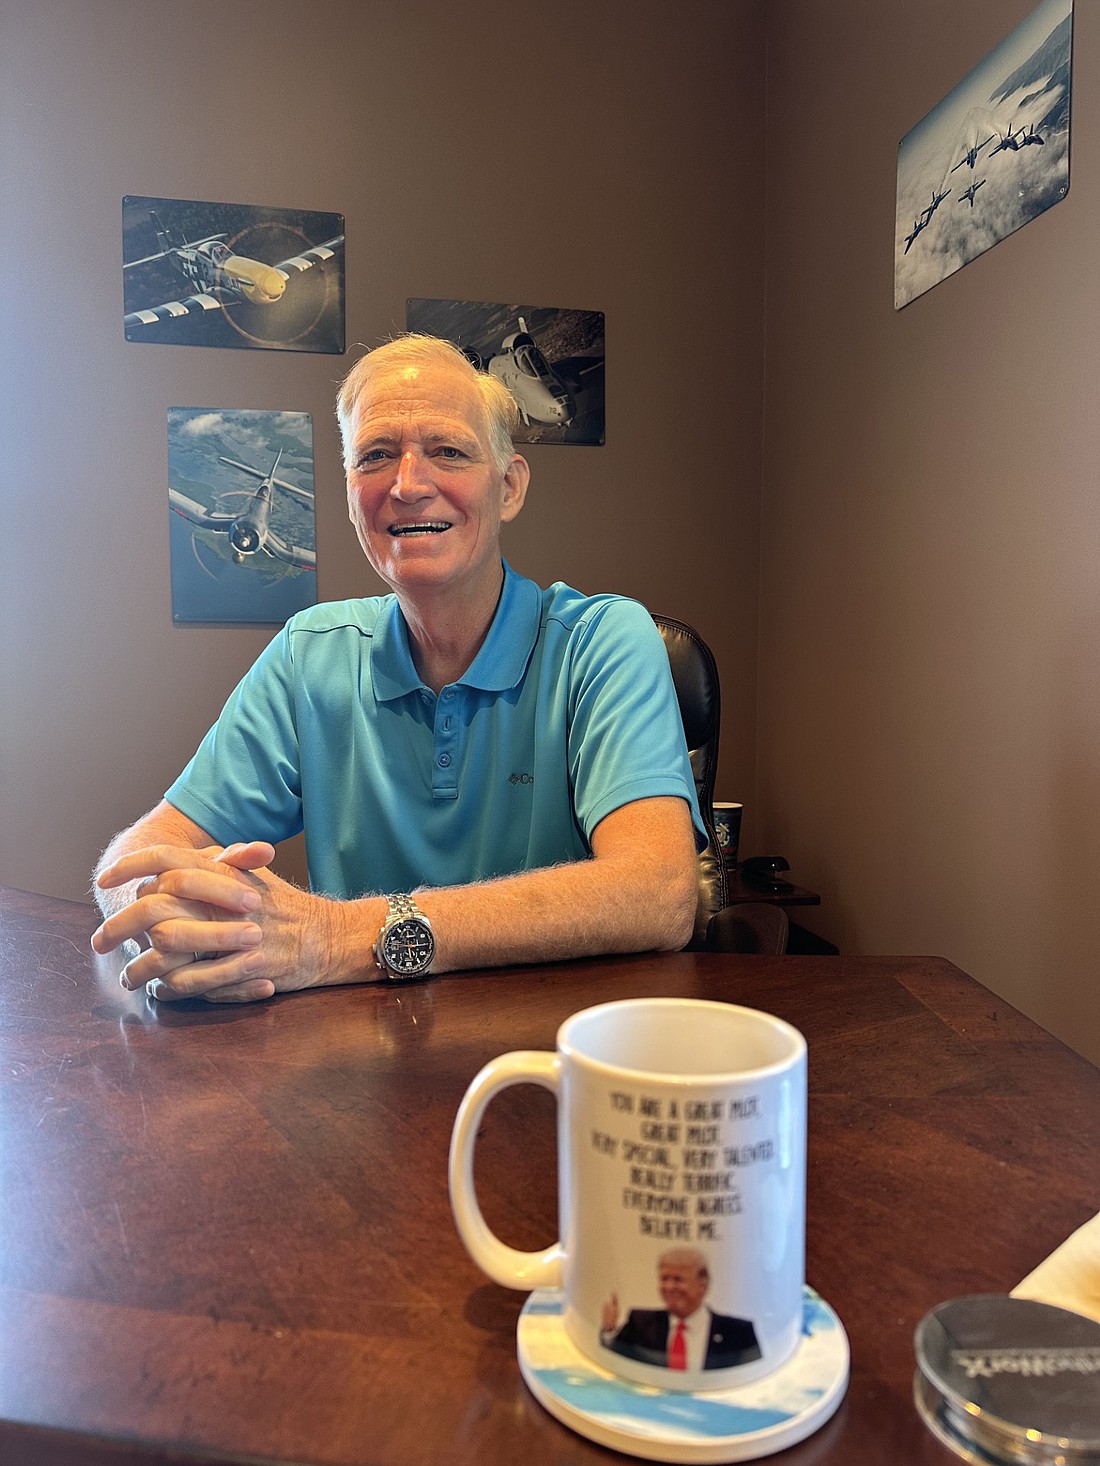 Brad Jackson, northern district county commissioner, talks about his 28 years of service to the county Tuesday in his hangar office at the Warsaw Municipal Airport. Photo by David Slone, Times-Union